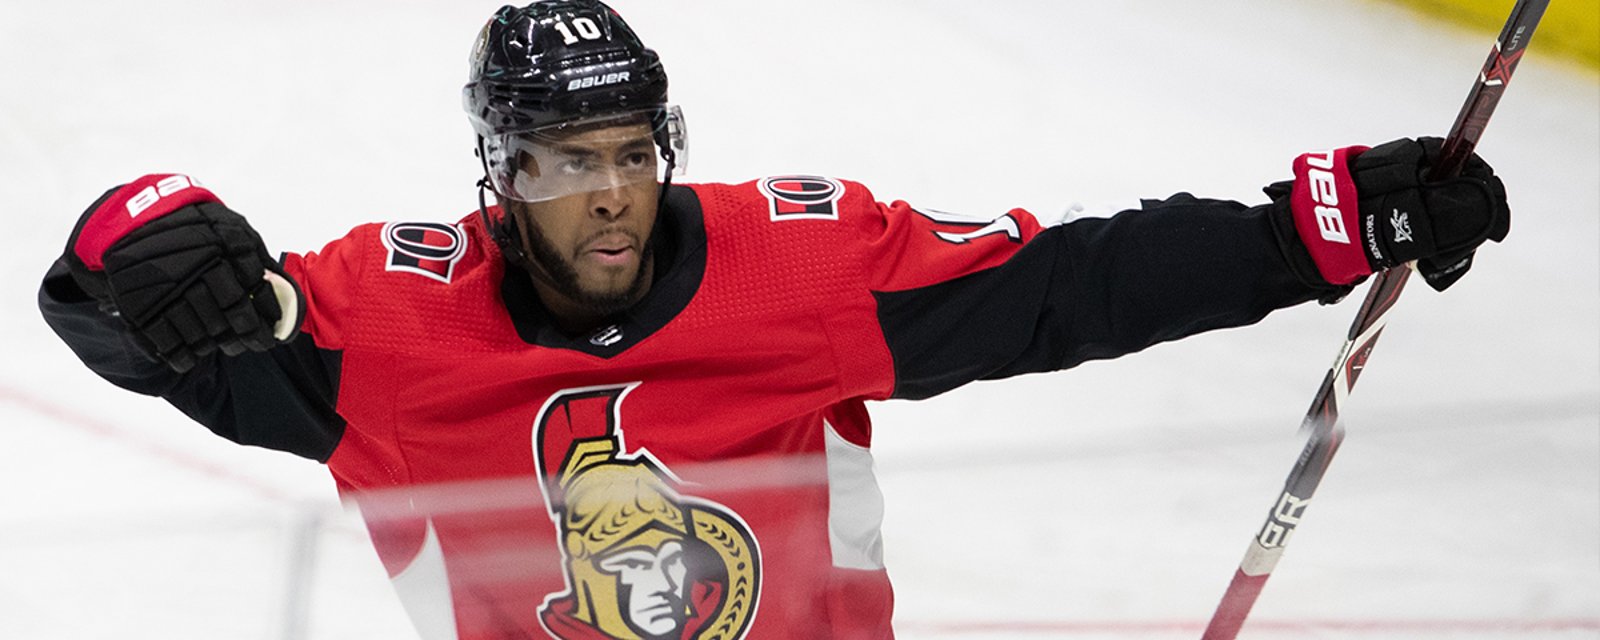 Anthony Duclair defends himself after allegations of sexual harassment from multiple women